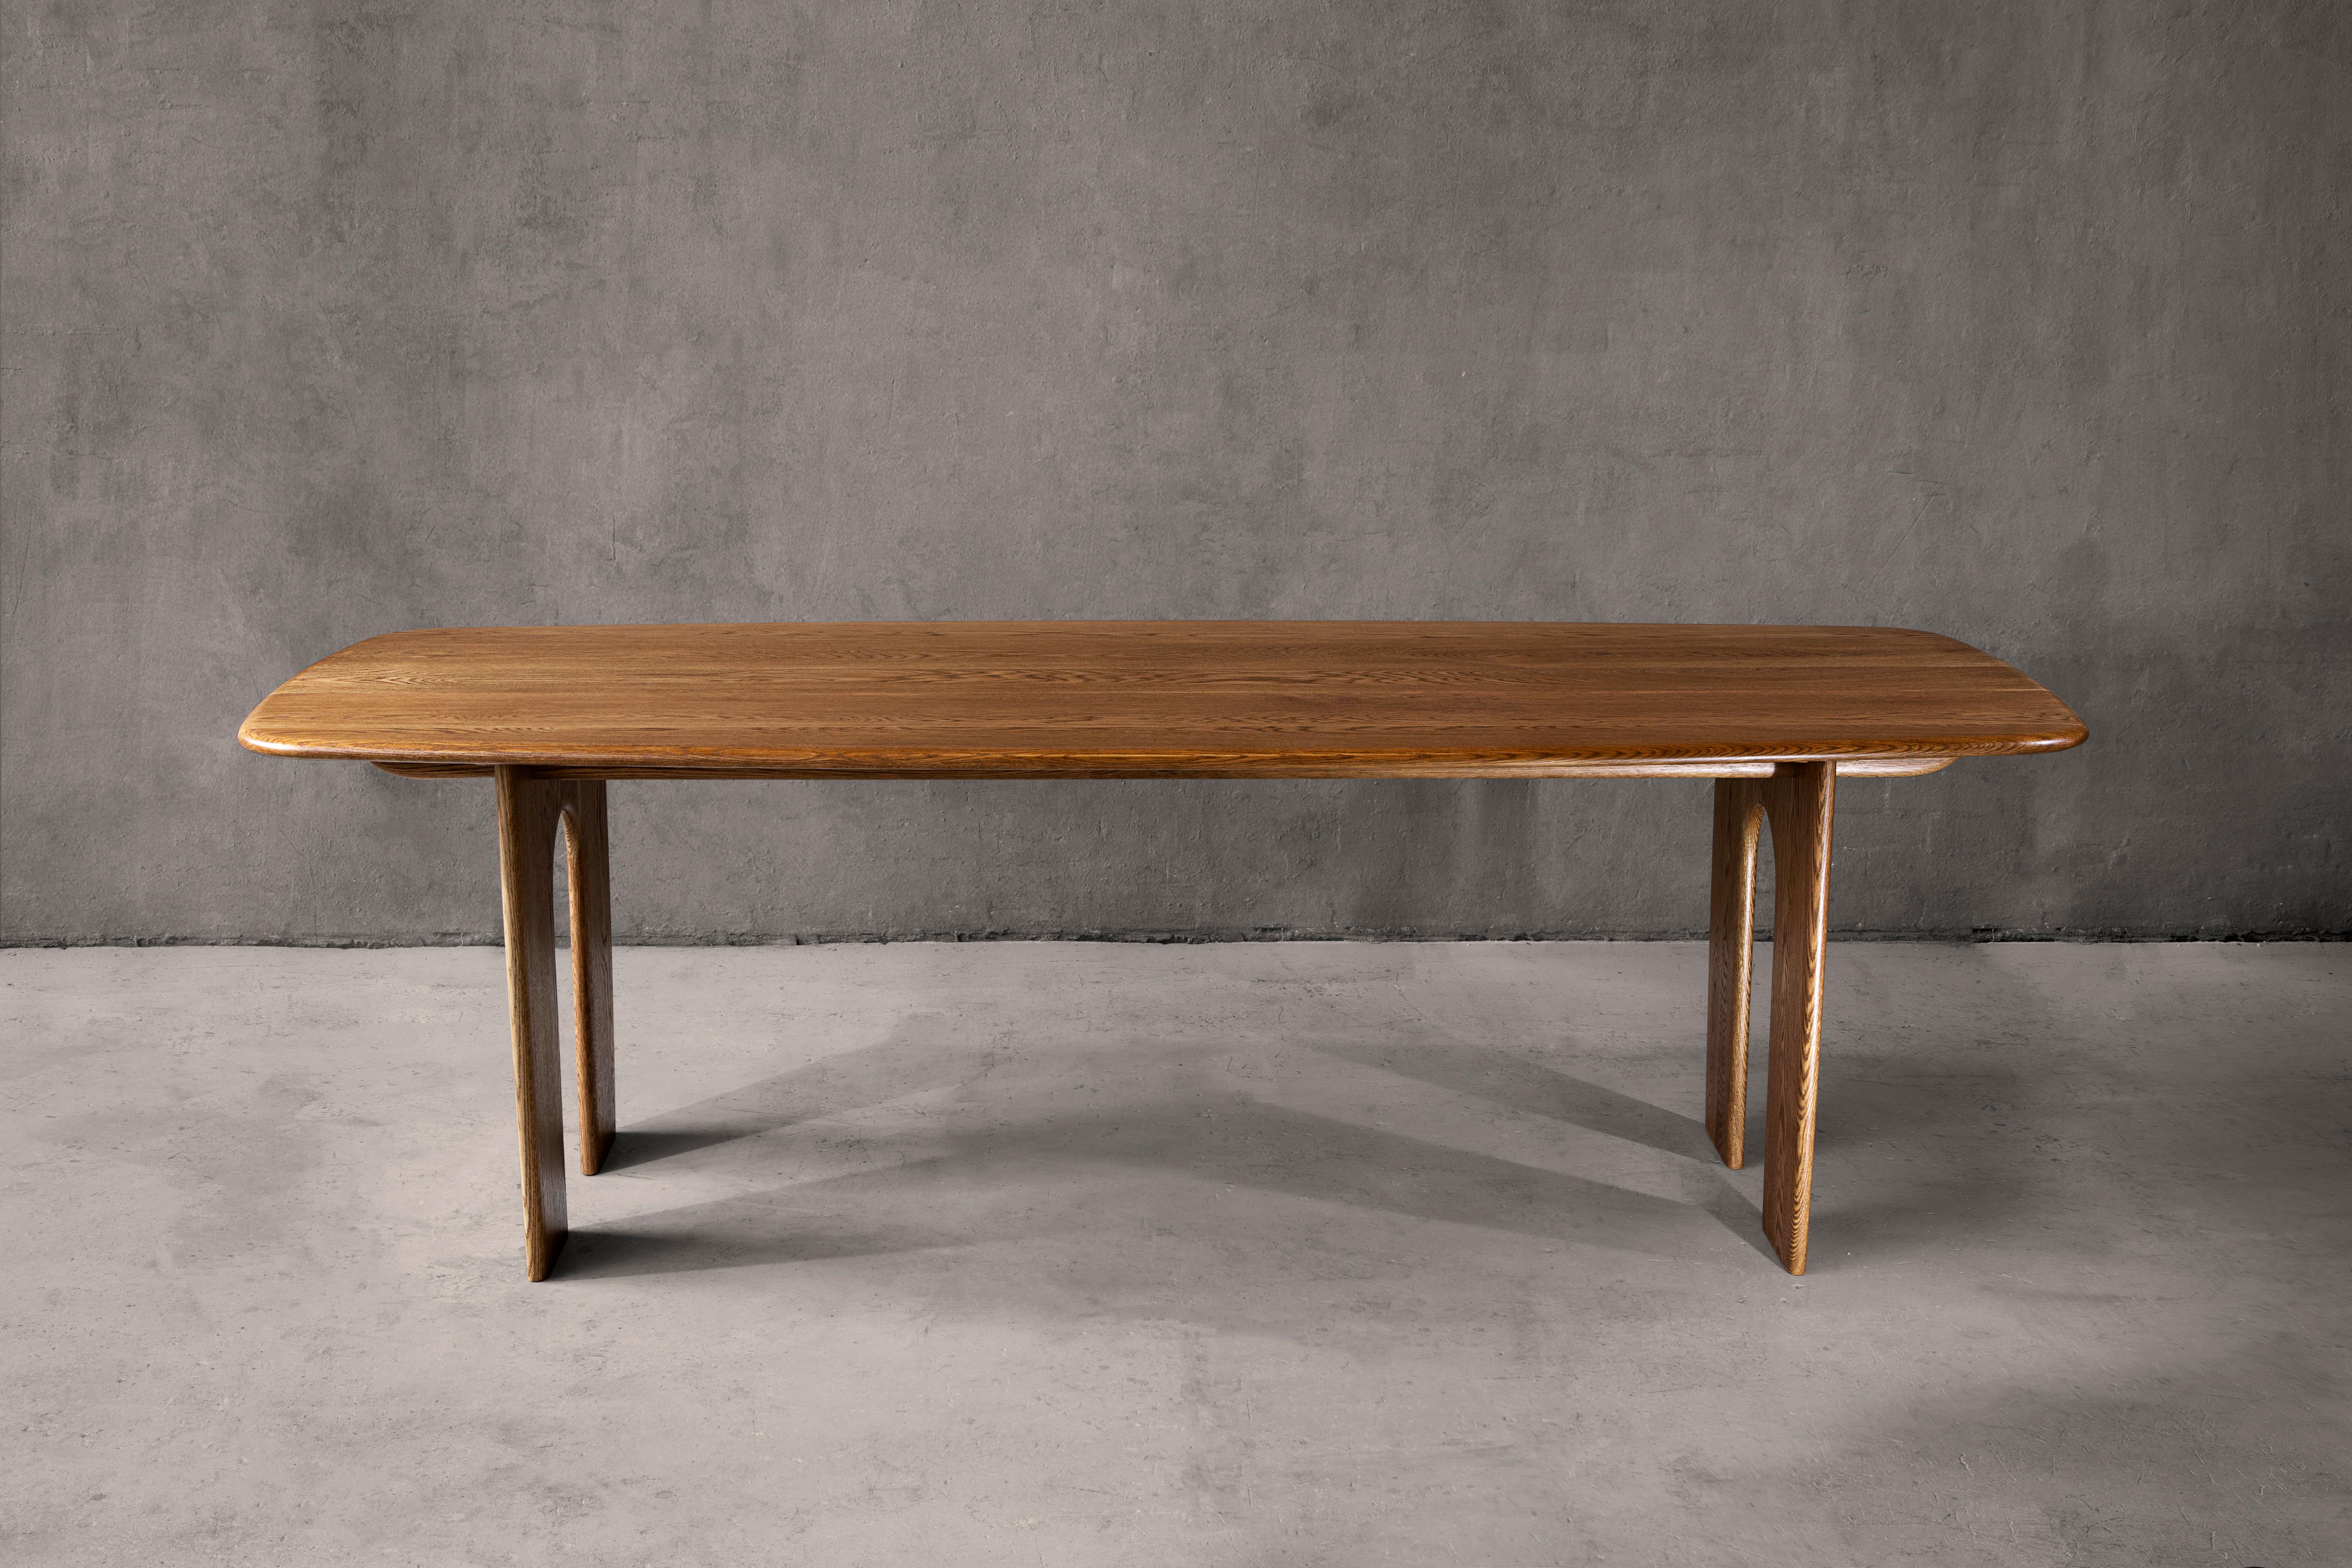 Inspired by the fishing boats traditionally used on the North East English coast. A made-to-order dining table designed by Lind +Almond and handcrafted in the UK.

Constructed from the finest oak veneer with pronounced grain and hand polished to a